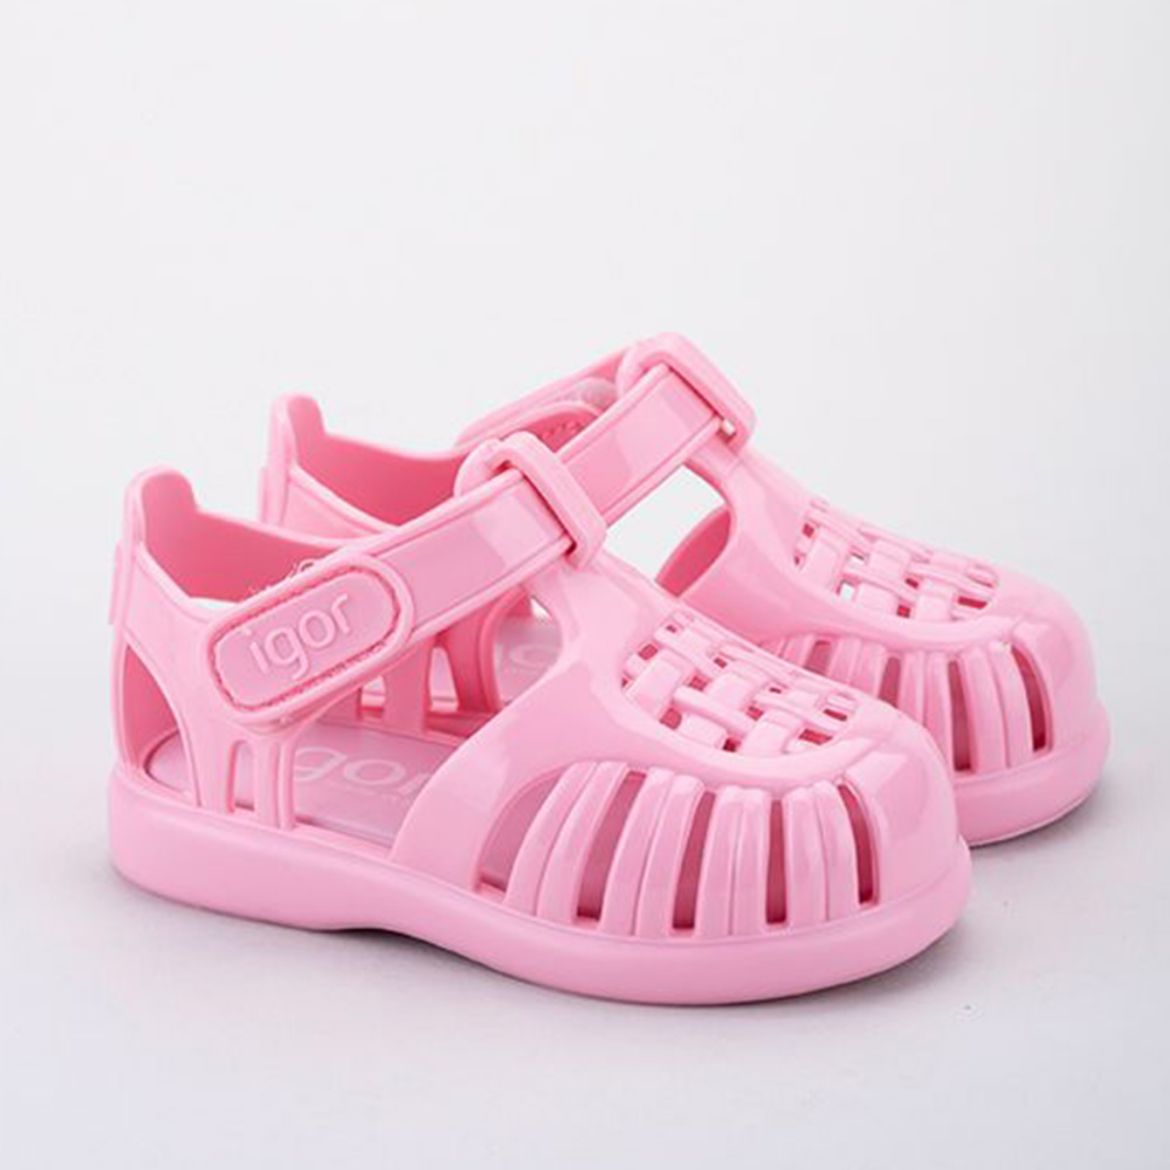 Picture of Igor Tobby Gloss Pink Jellies